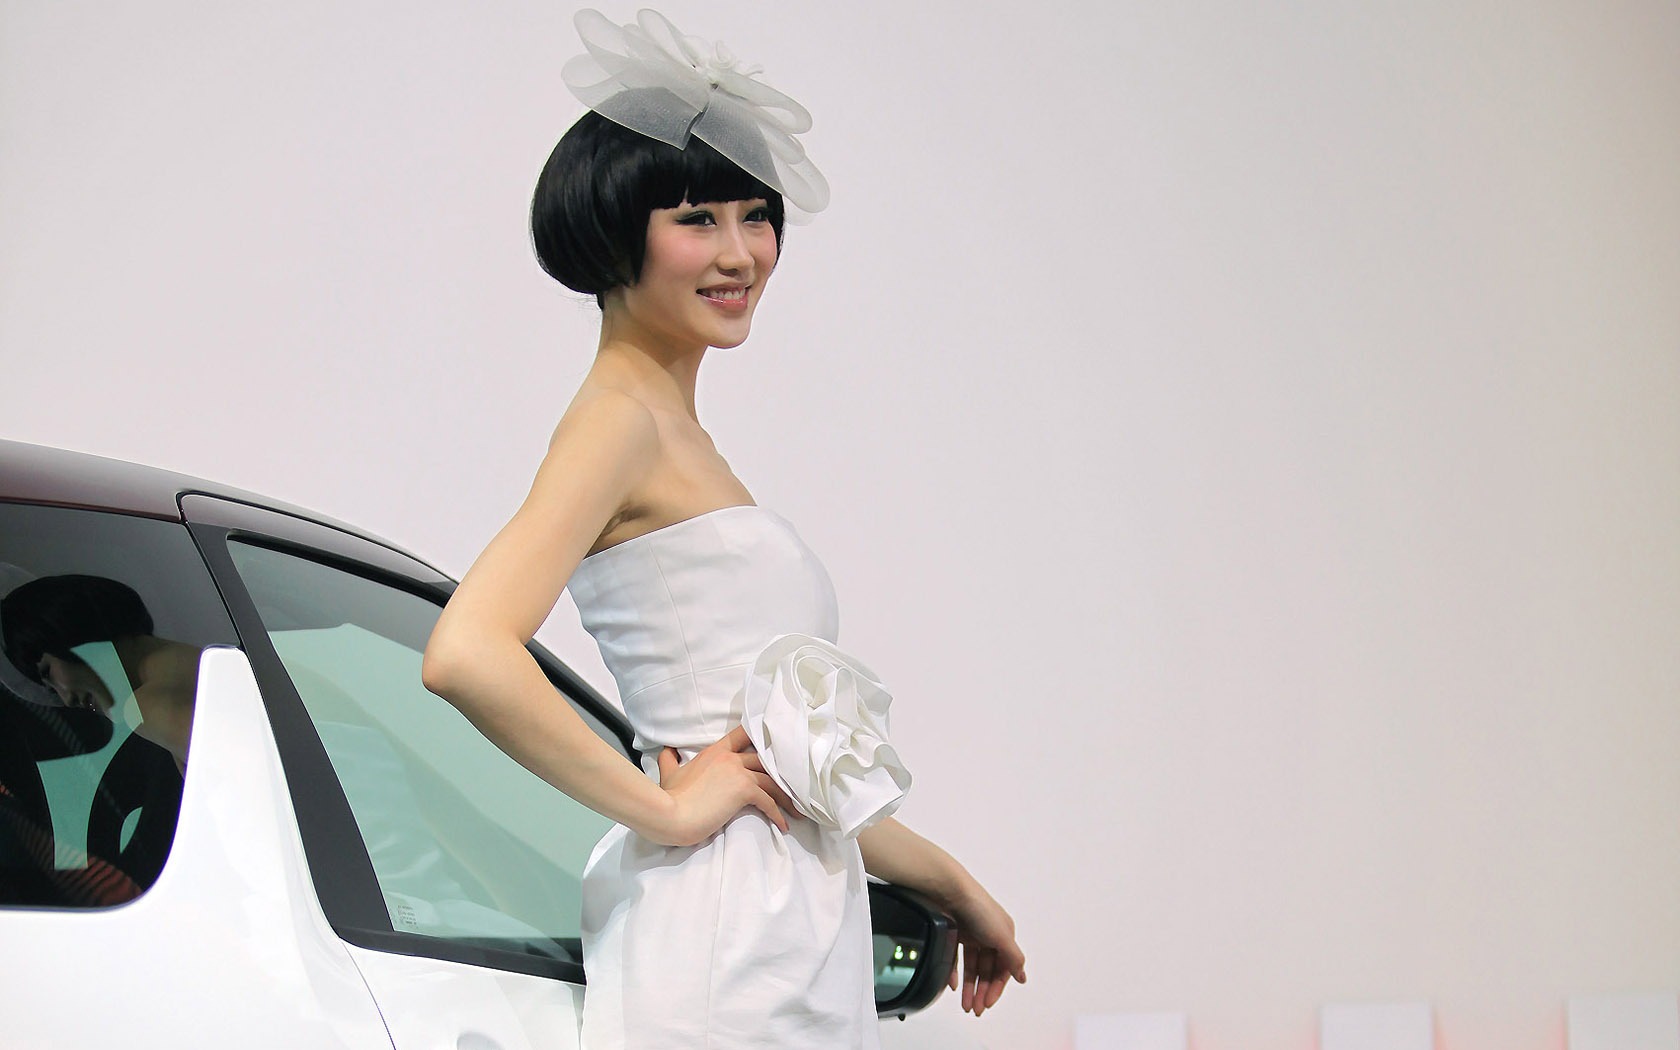 2010 Beijing Auto Show car models Collection (2) #8 - 1680x1050